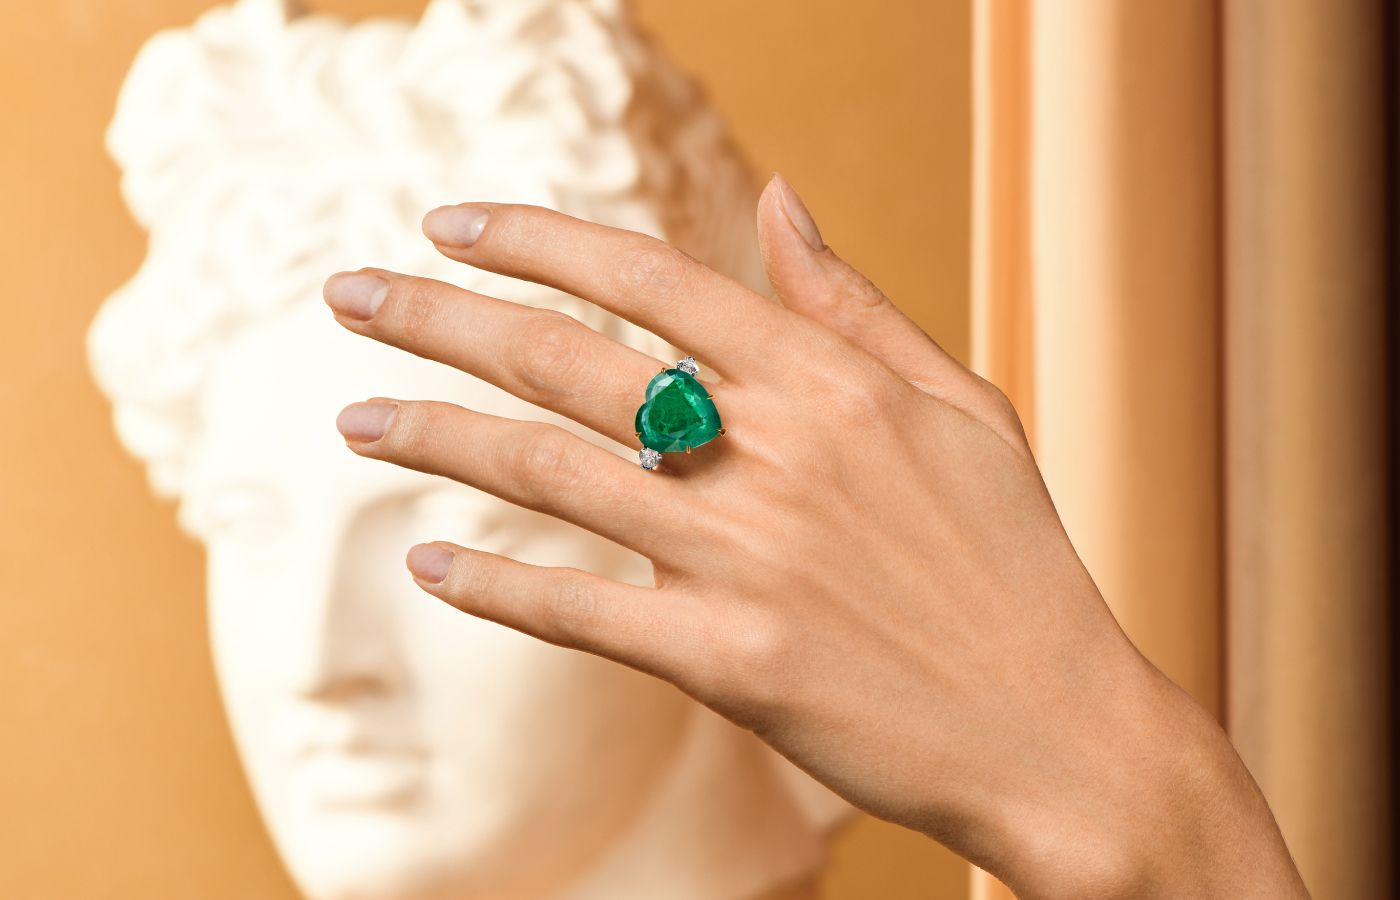 Parure Atelier High Jewellery ring featuring a 10.71-ct Zambian emerald and diamonds